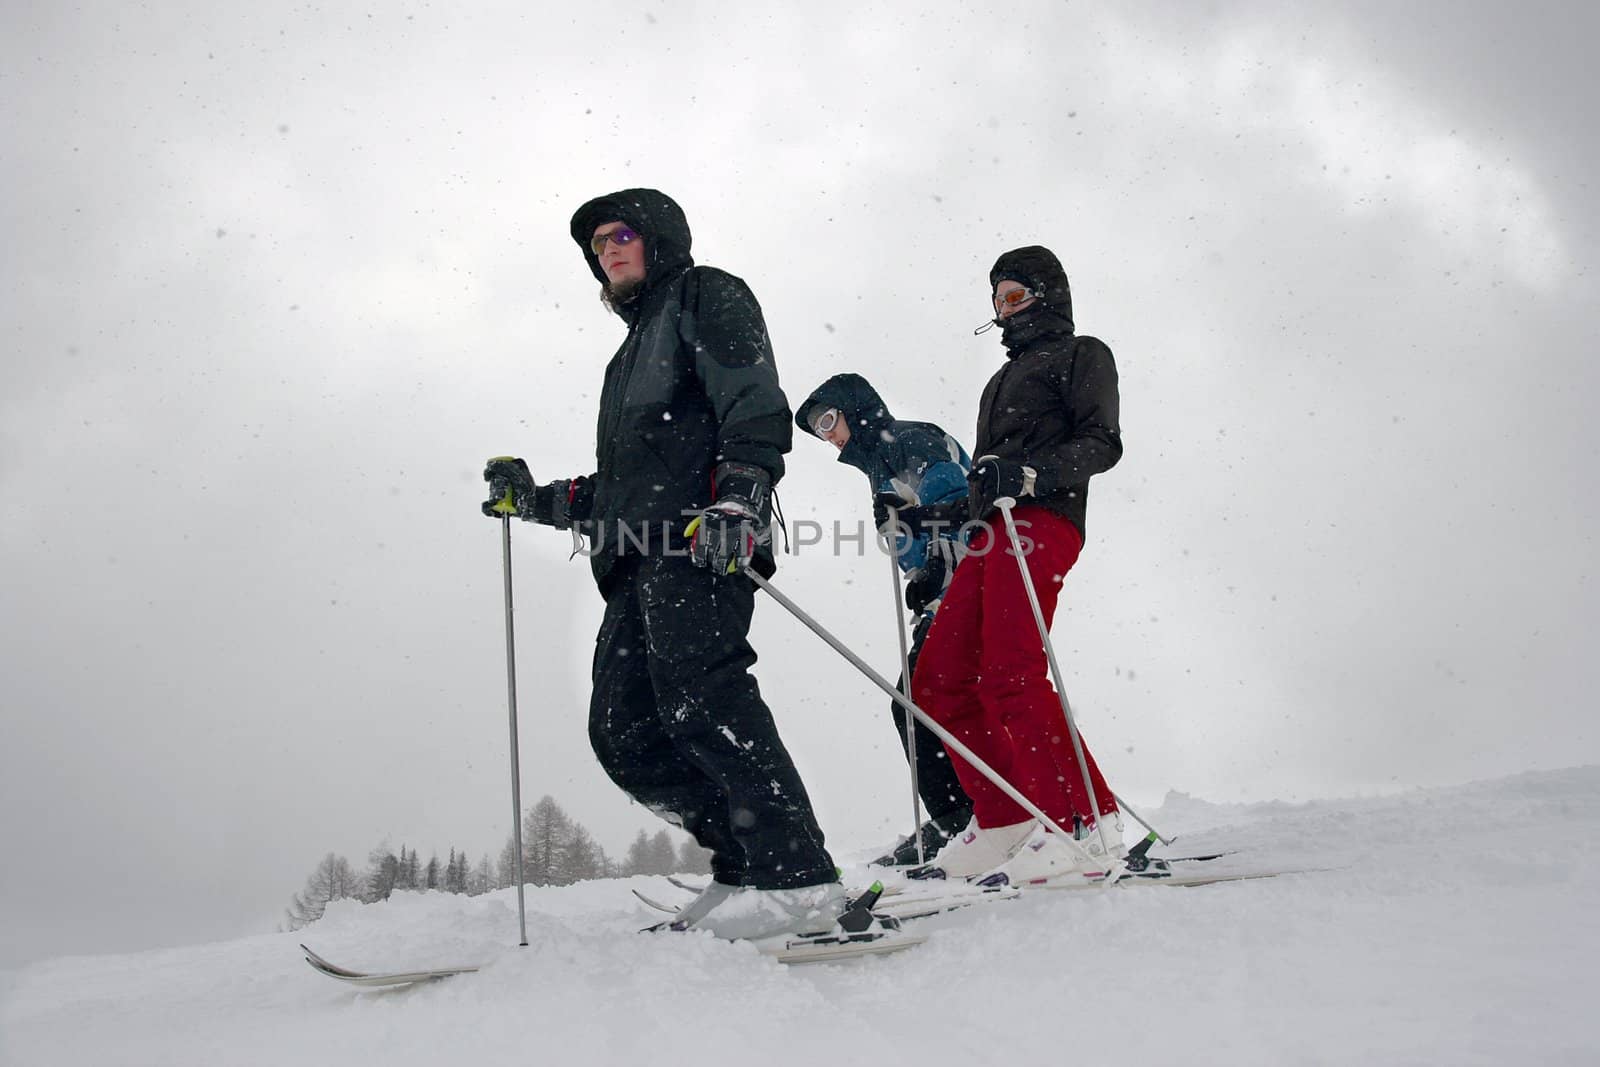 Skiers in the falling snow